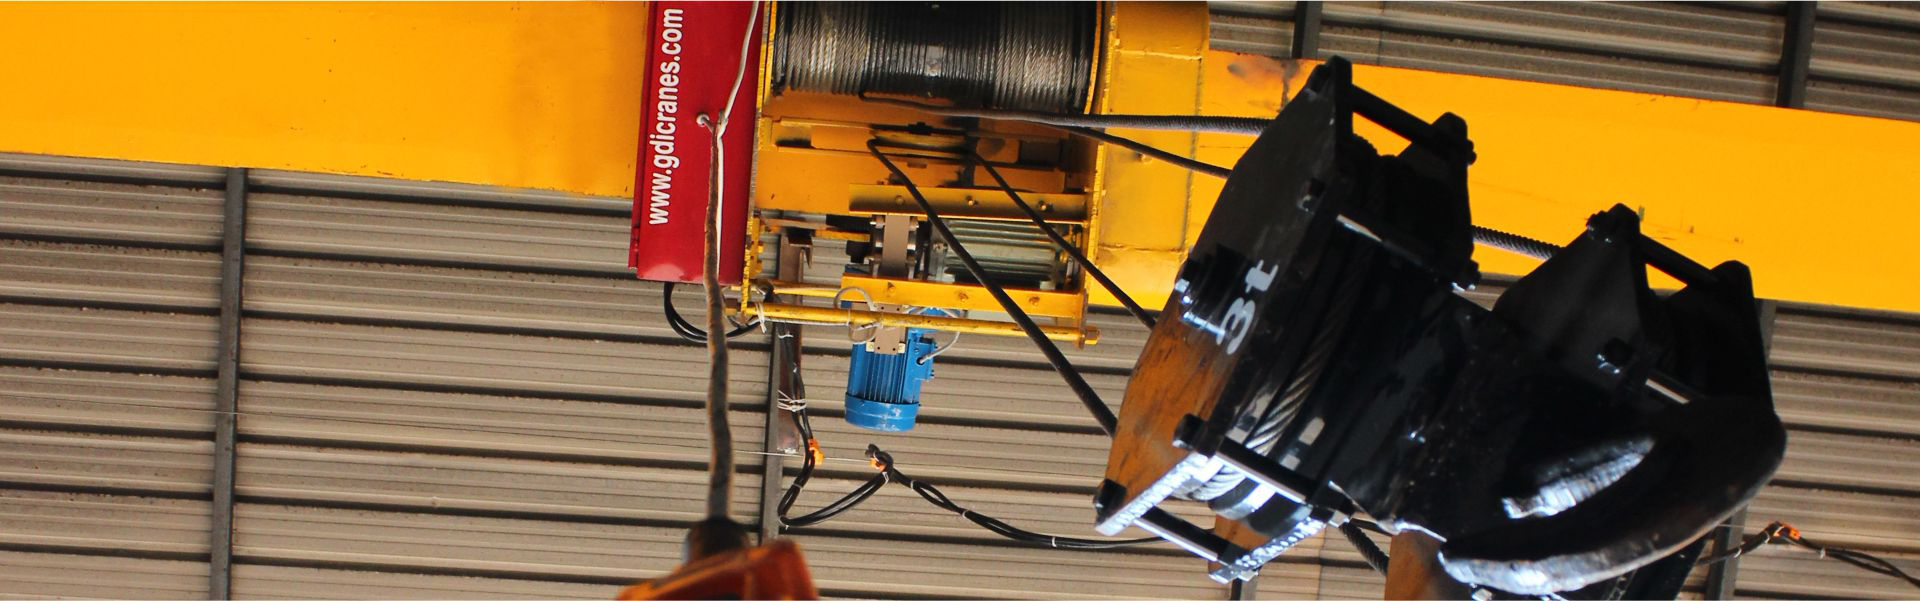 Electric wire rope hoist manufacturers in Ludhiana Punjab India